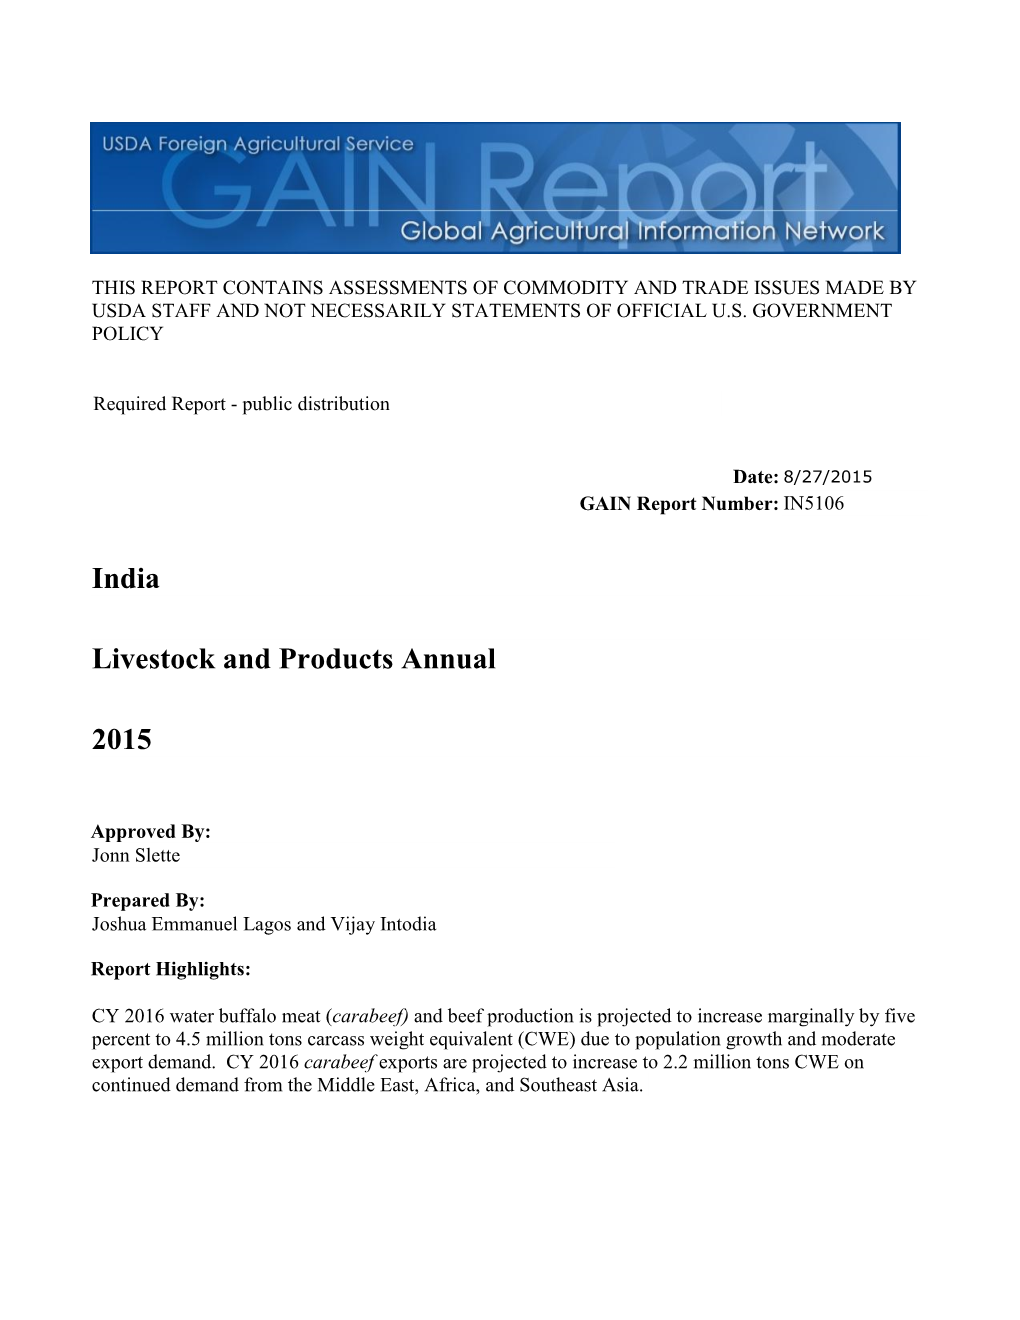 2015 Livestock and Products Annual India